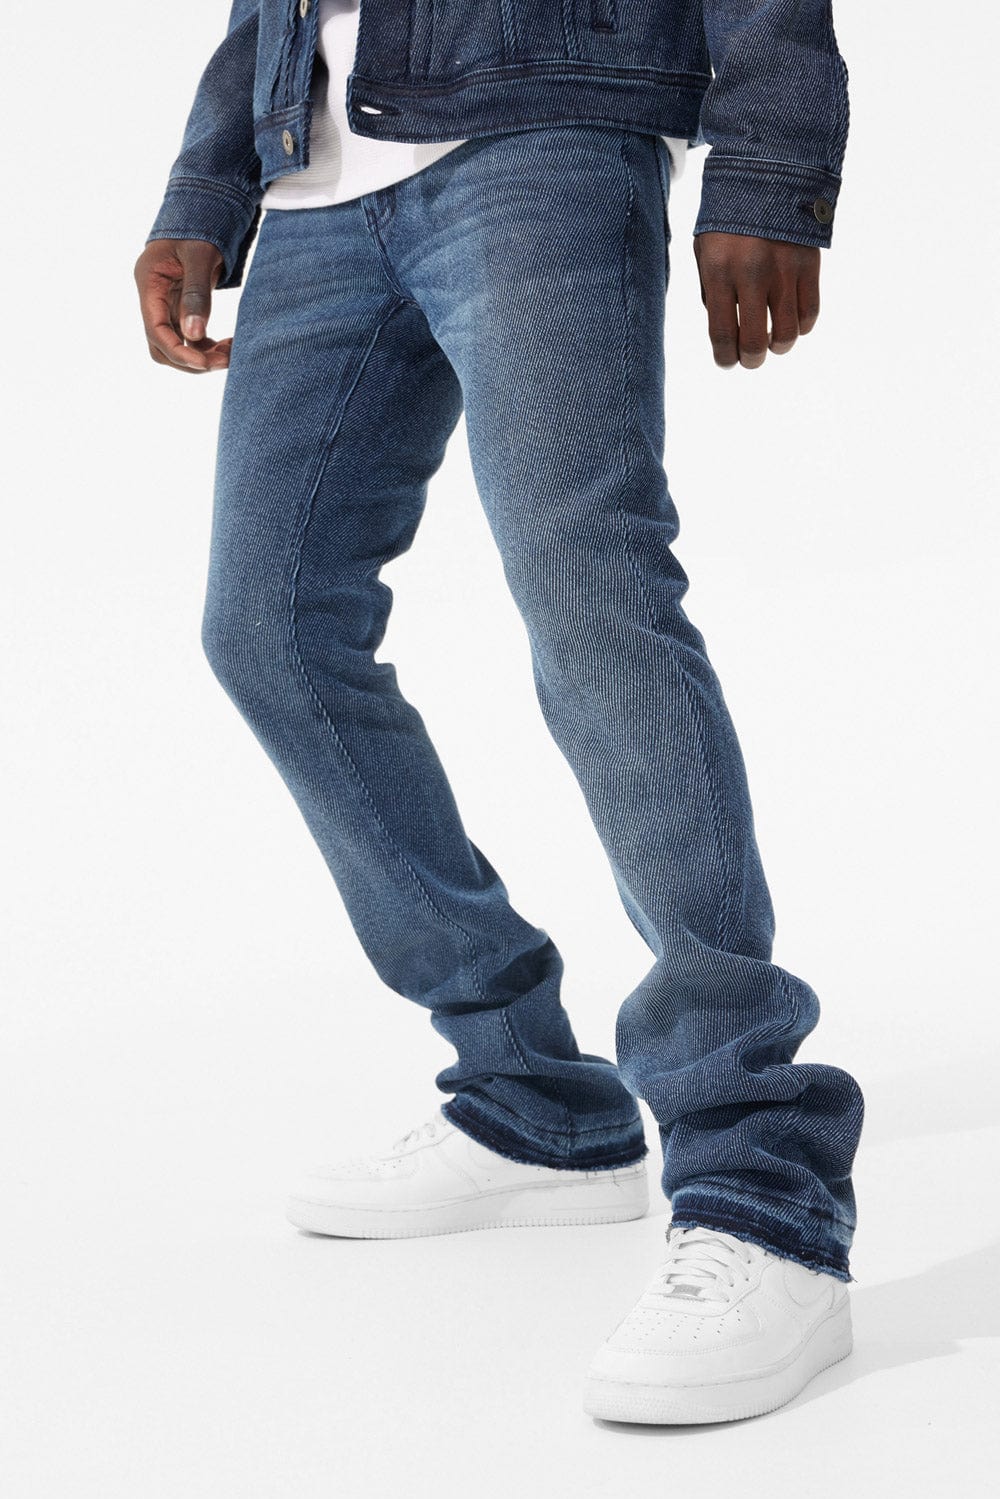 MARTIN STACKED - CAVALRY DENIM (IMPERIAL BLUE)(JTF359)